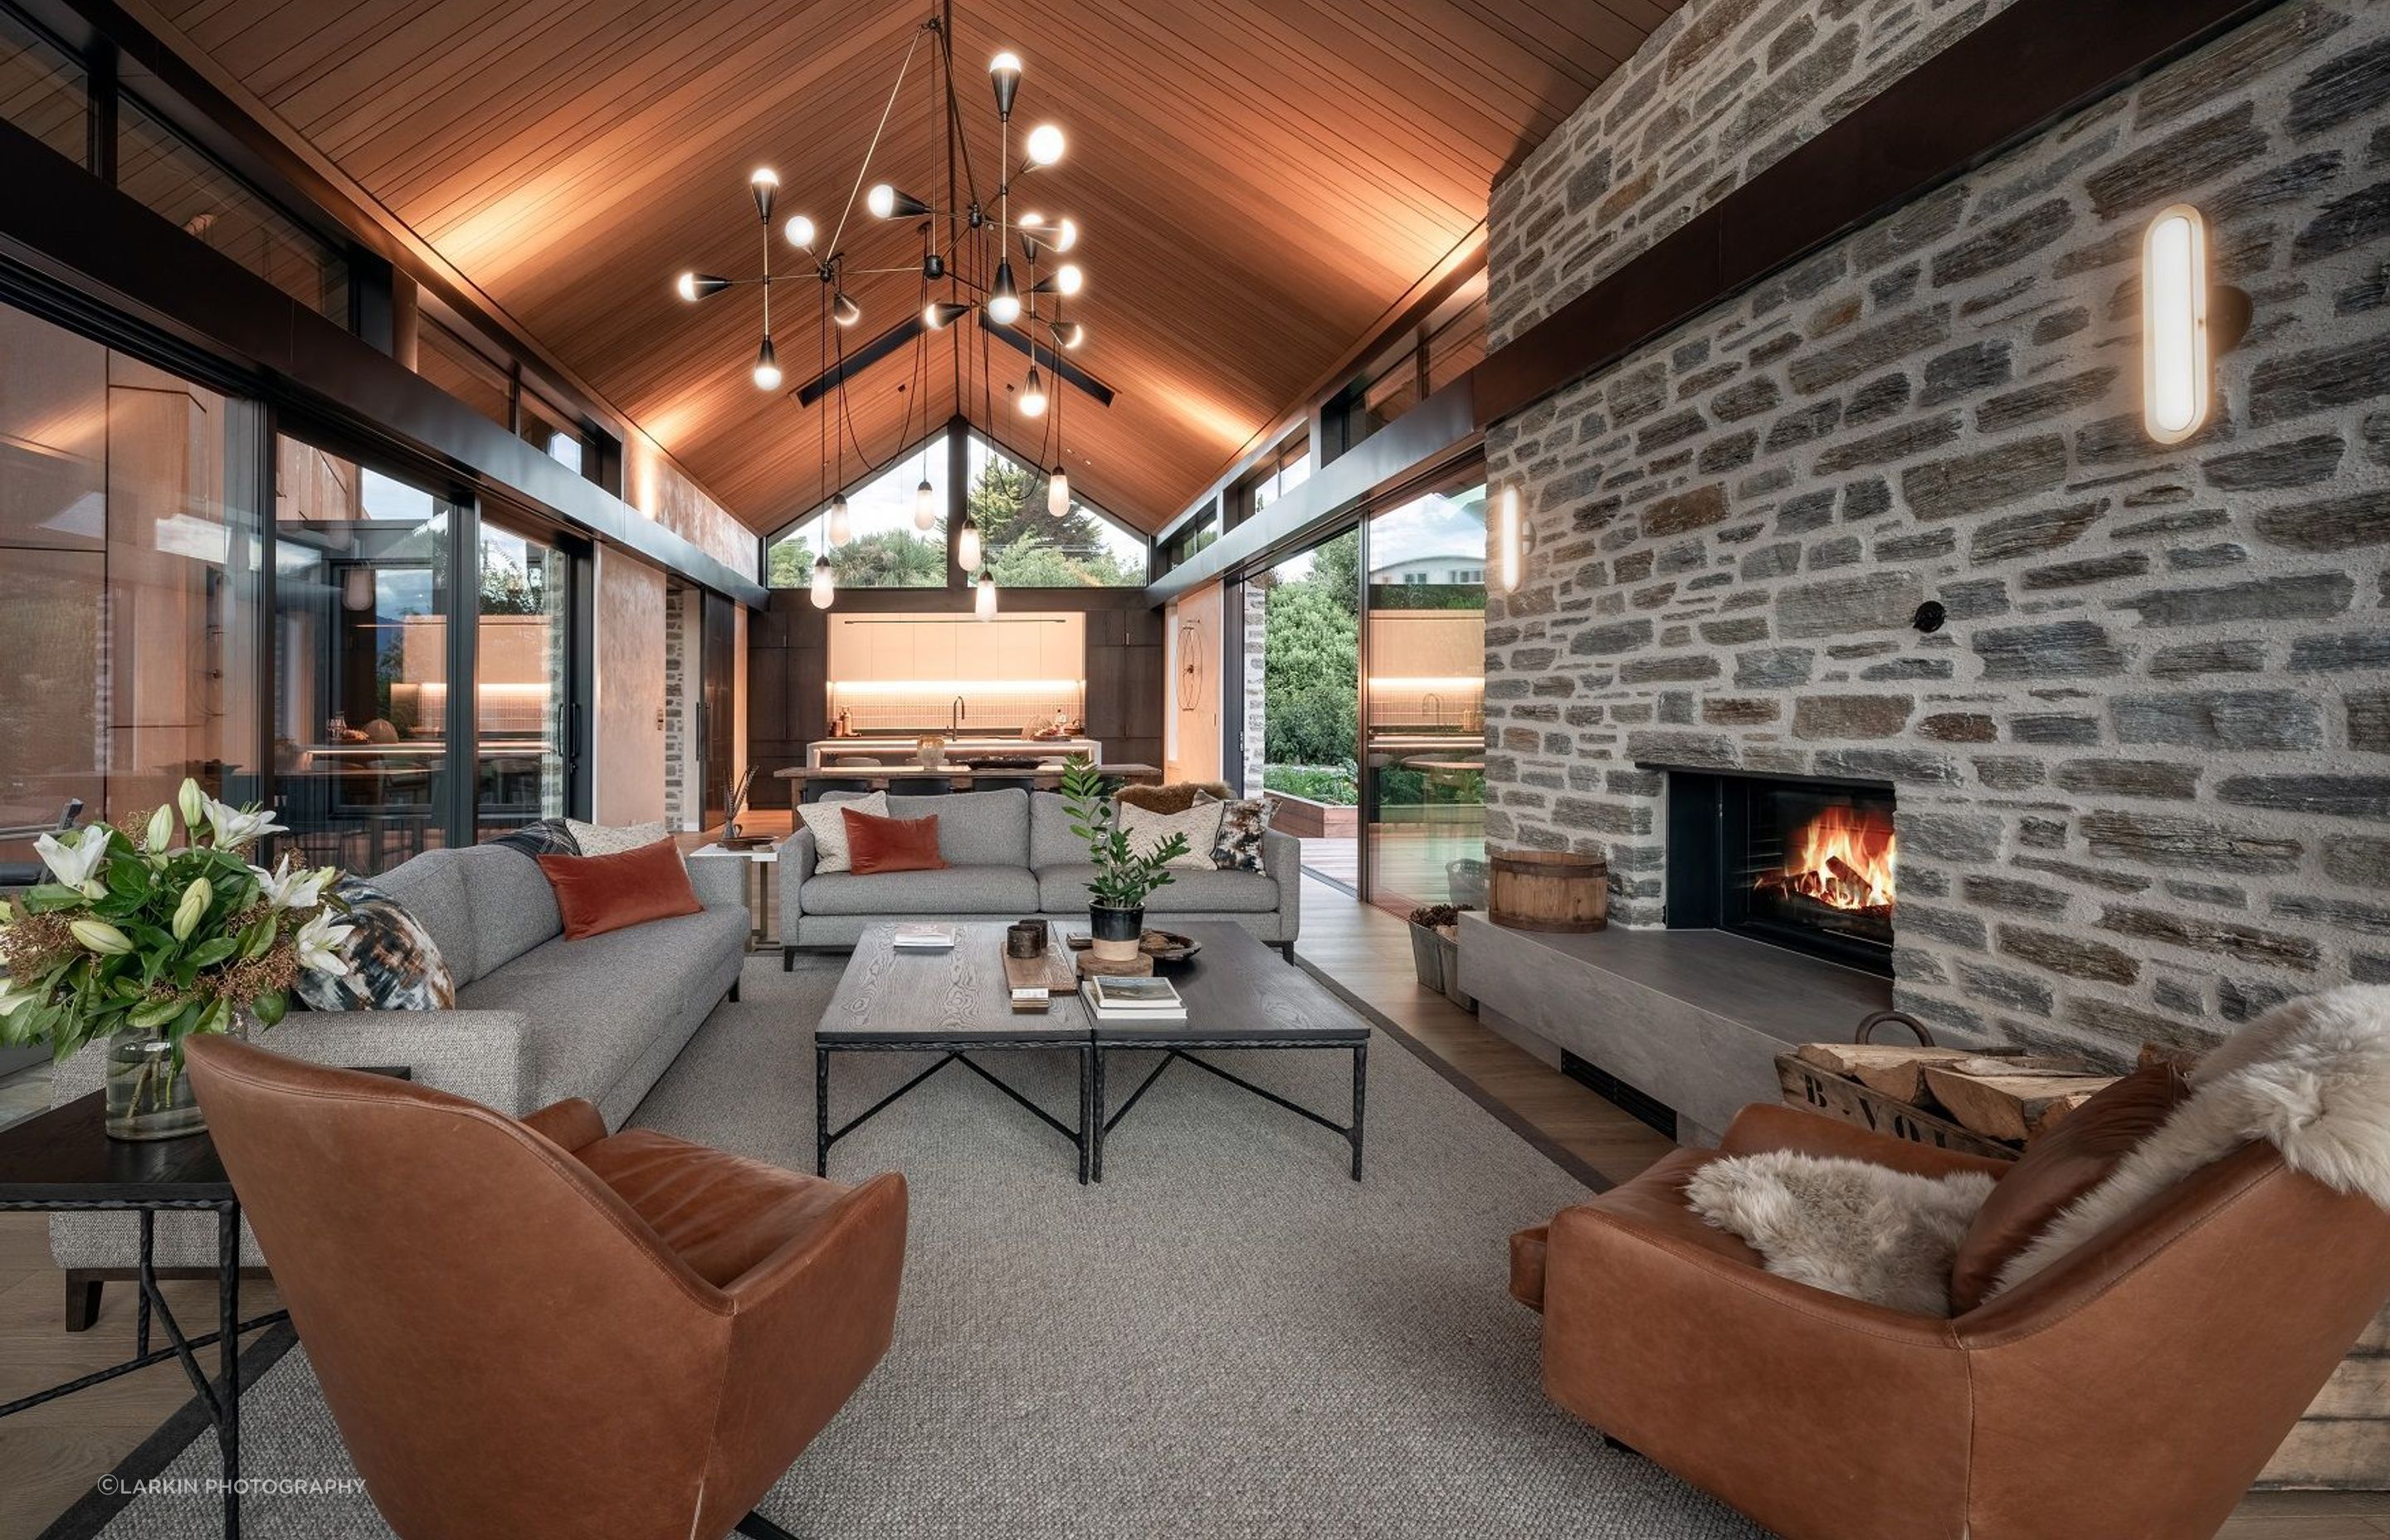 The living area features am open fire, which is specifically designed to be compliant with the air shed regulations, and means the space has a characterful feel.